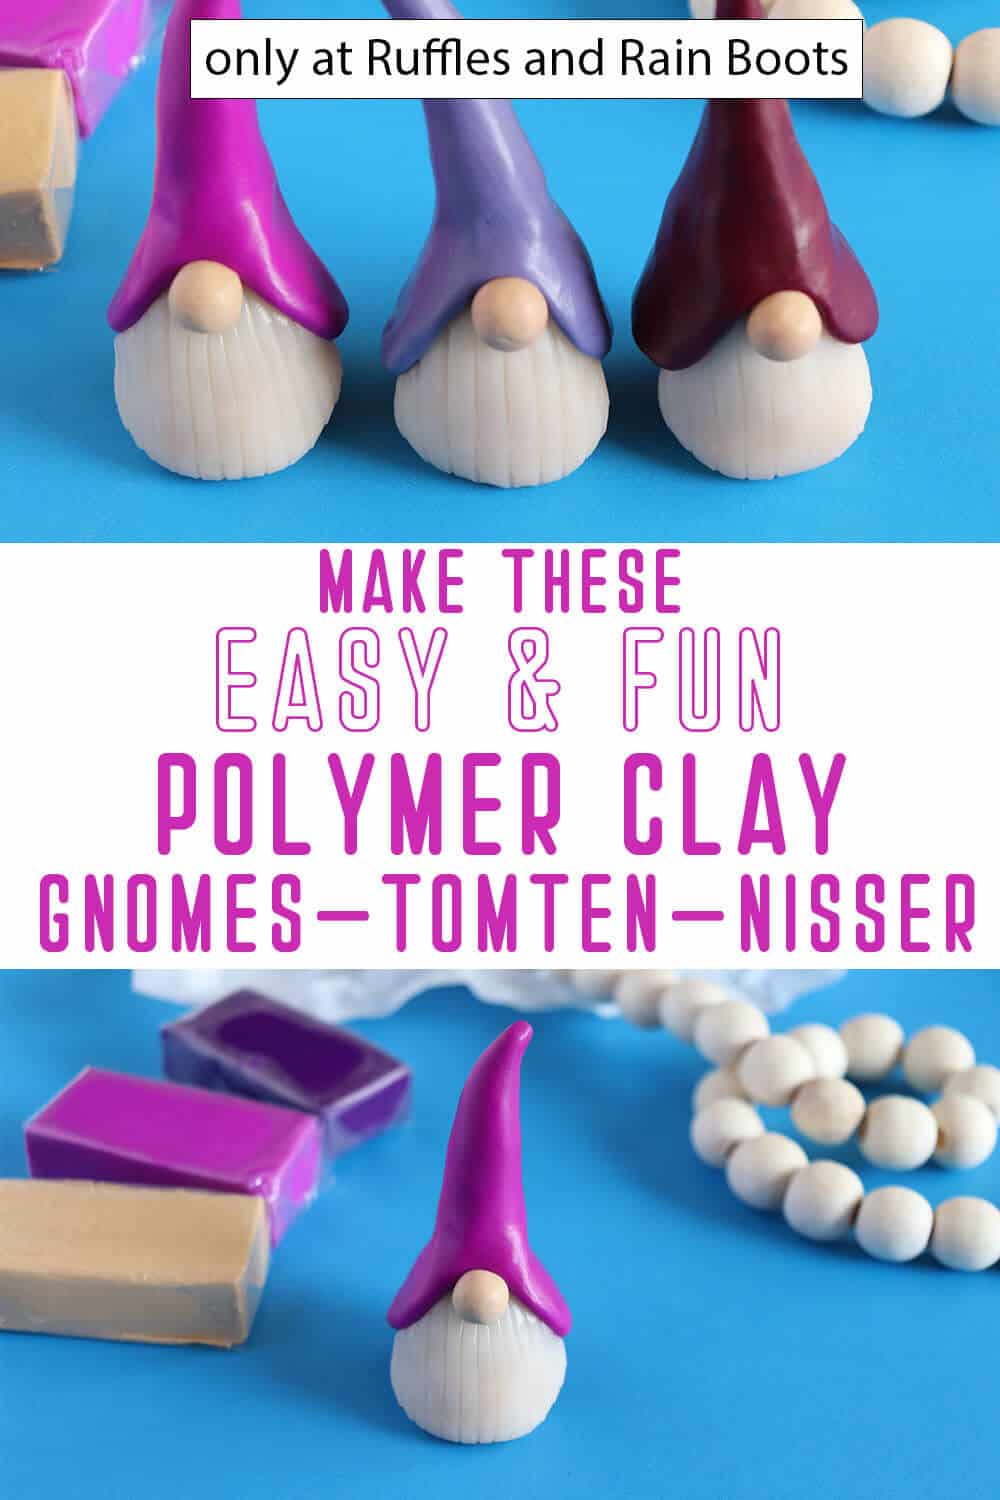 photo collage of easy diy clay gnomes with text which reads make these easy & fun polymer clay gnomes tomten nisser